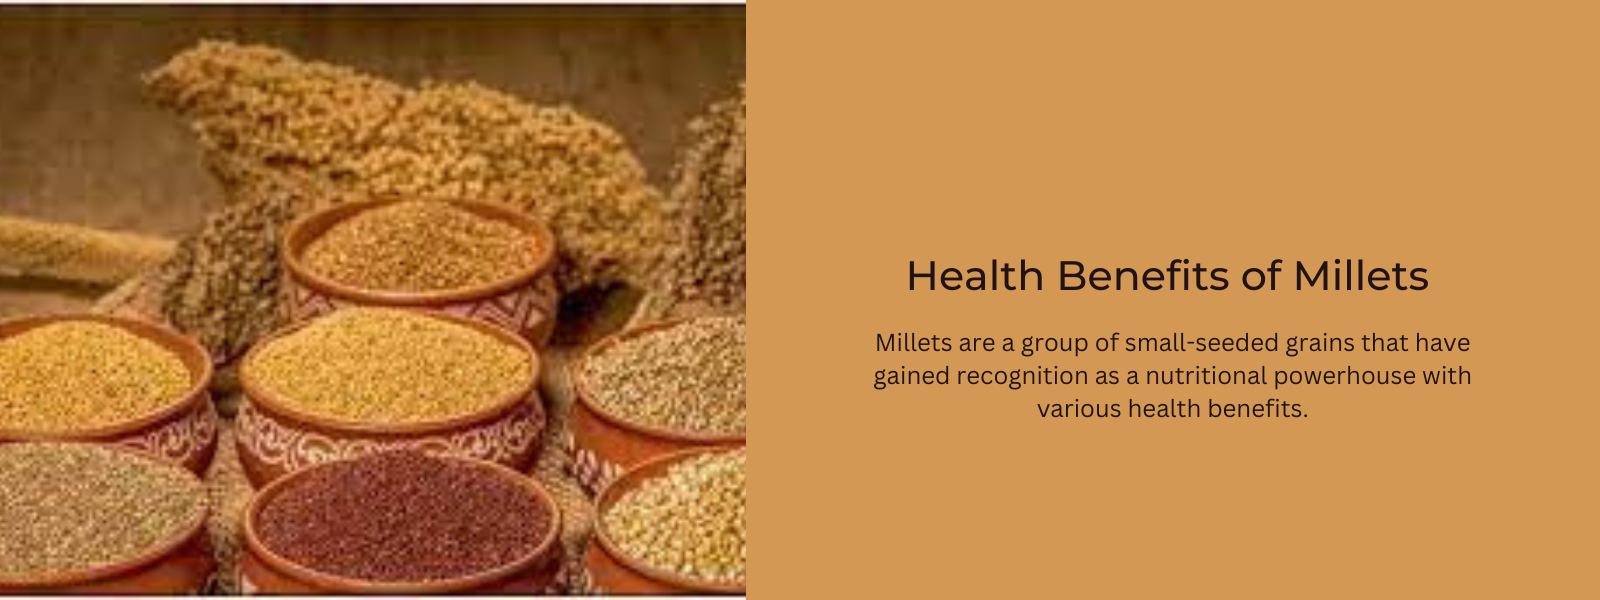 The Nutritional Powerhouse: Health Benefits of Millets